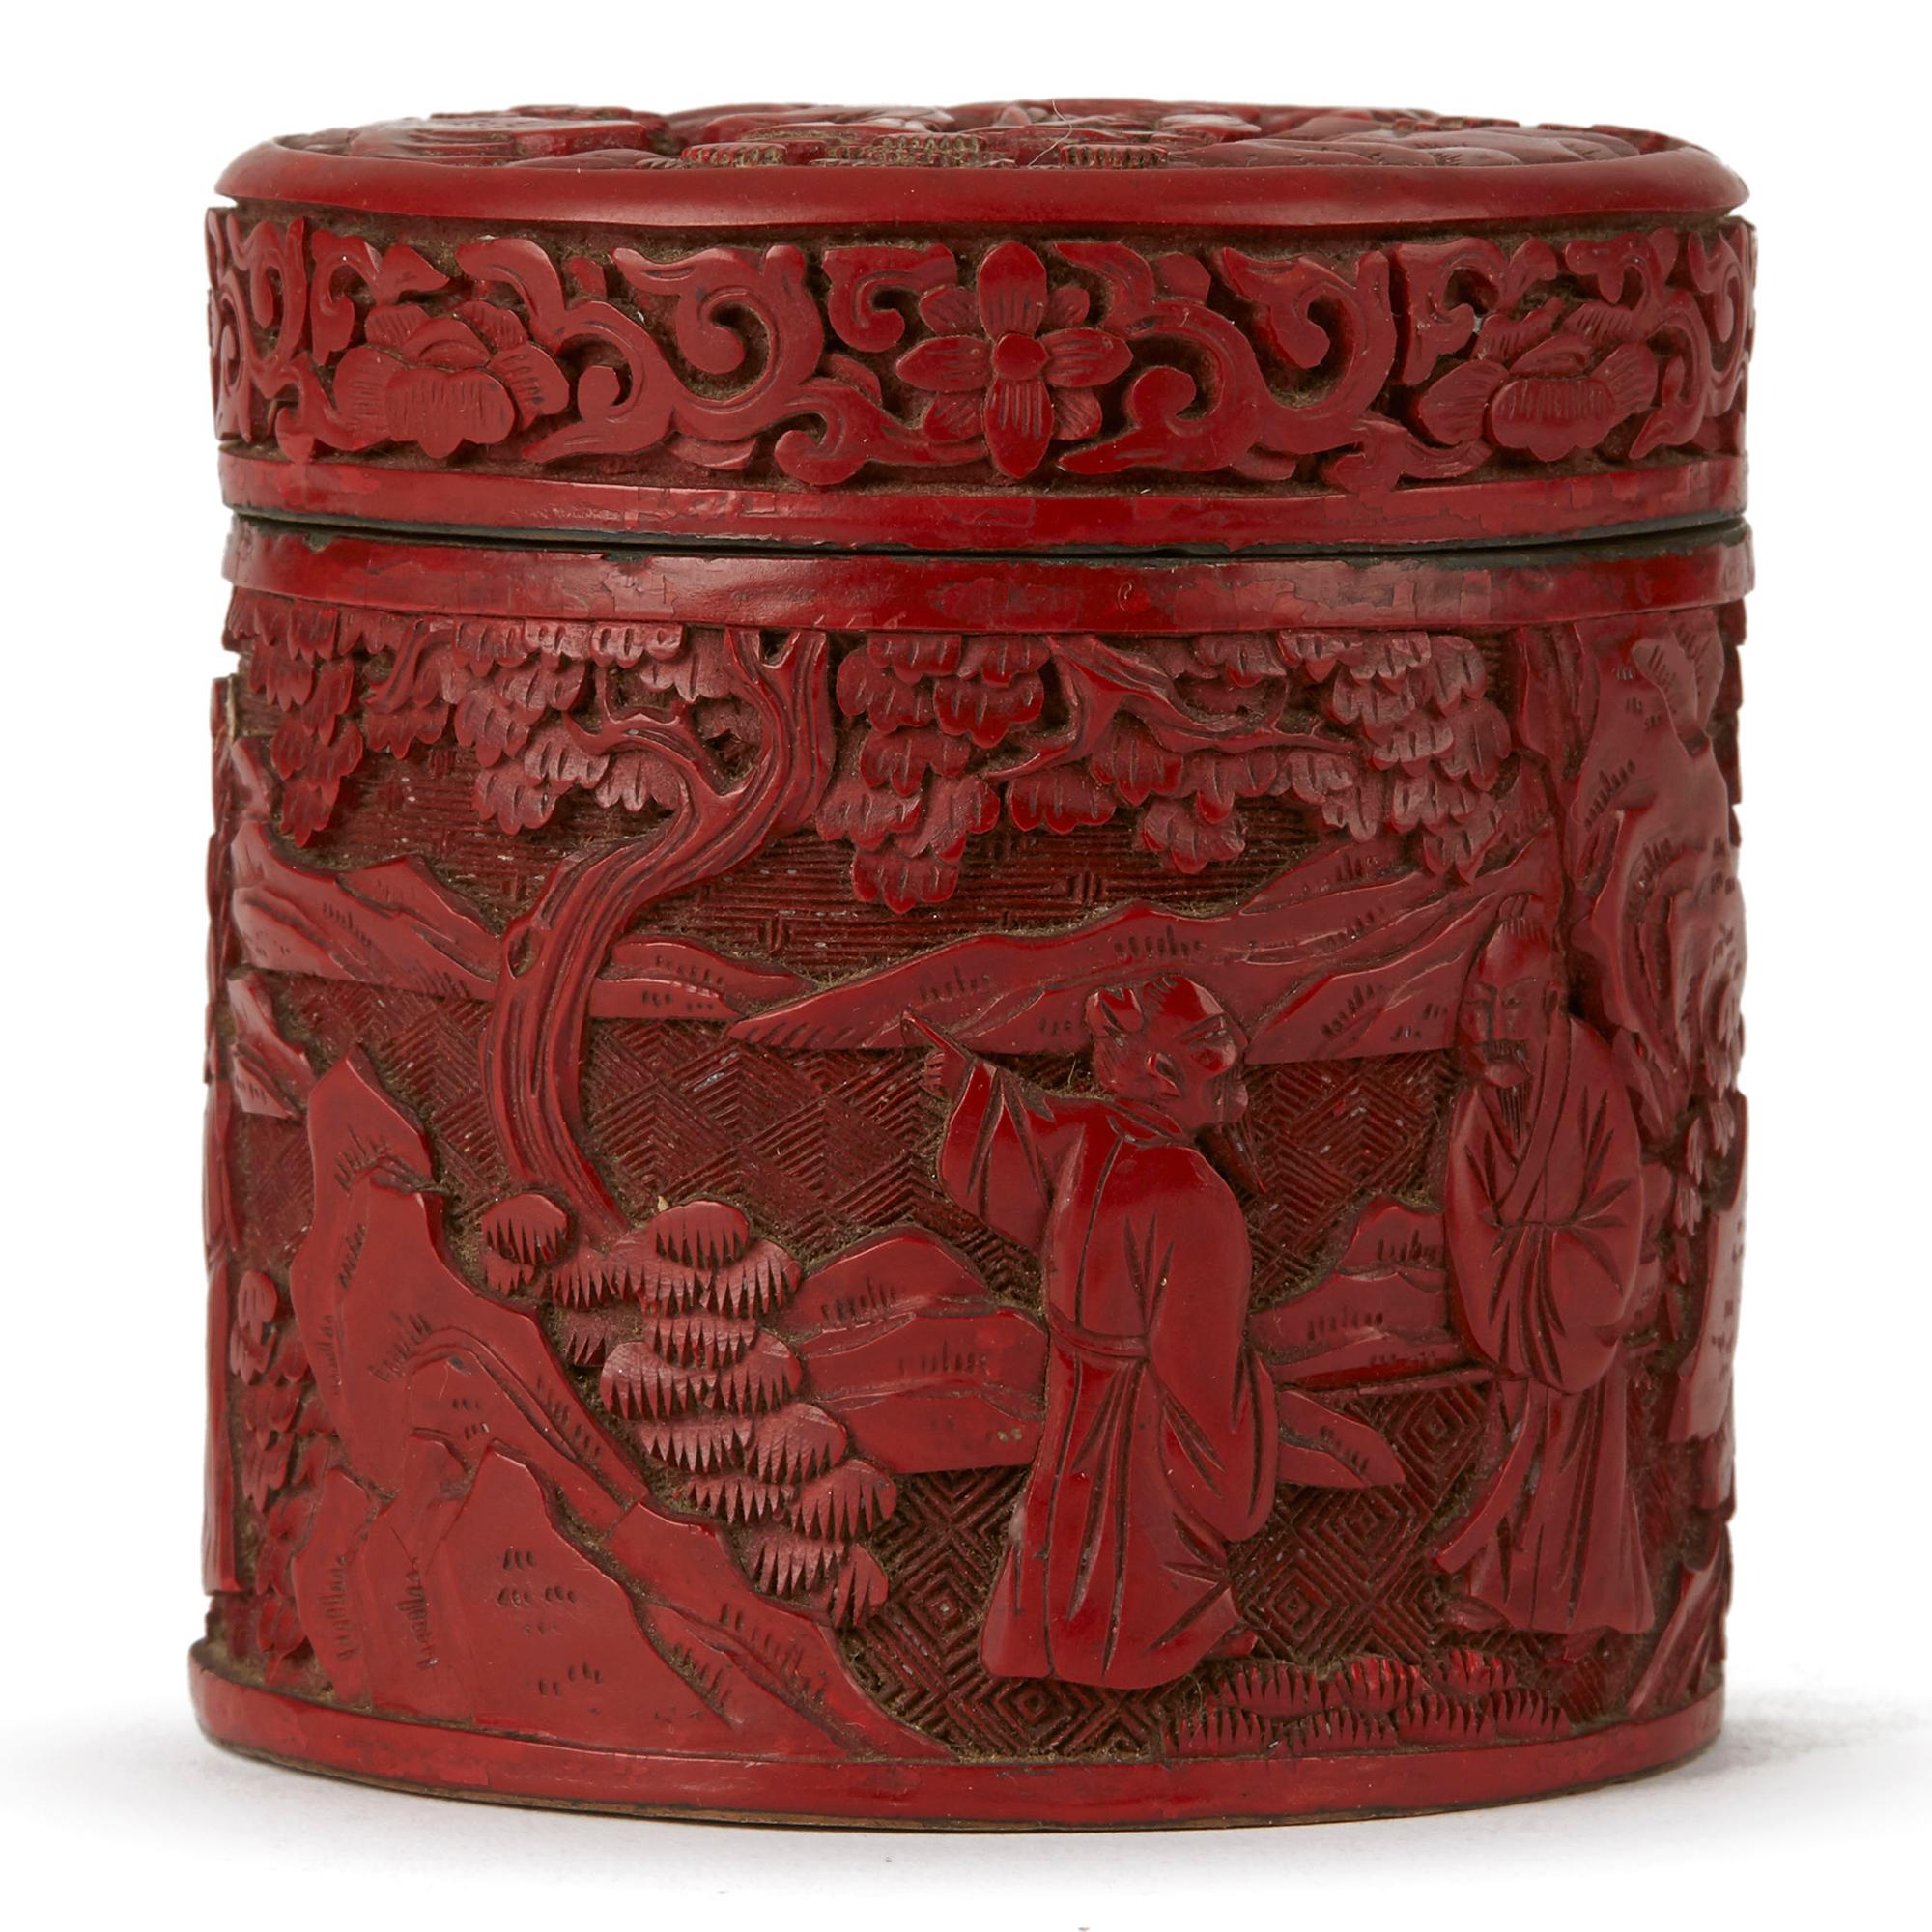 A fine quality antique Chinese red cinnabar lacquer lidded pot, possibly for tea, deeply carved with figures in landscapes with turquoise blue enamels to the inside and to the base. The lidded pot is not marked.